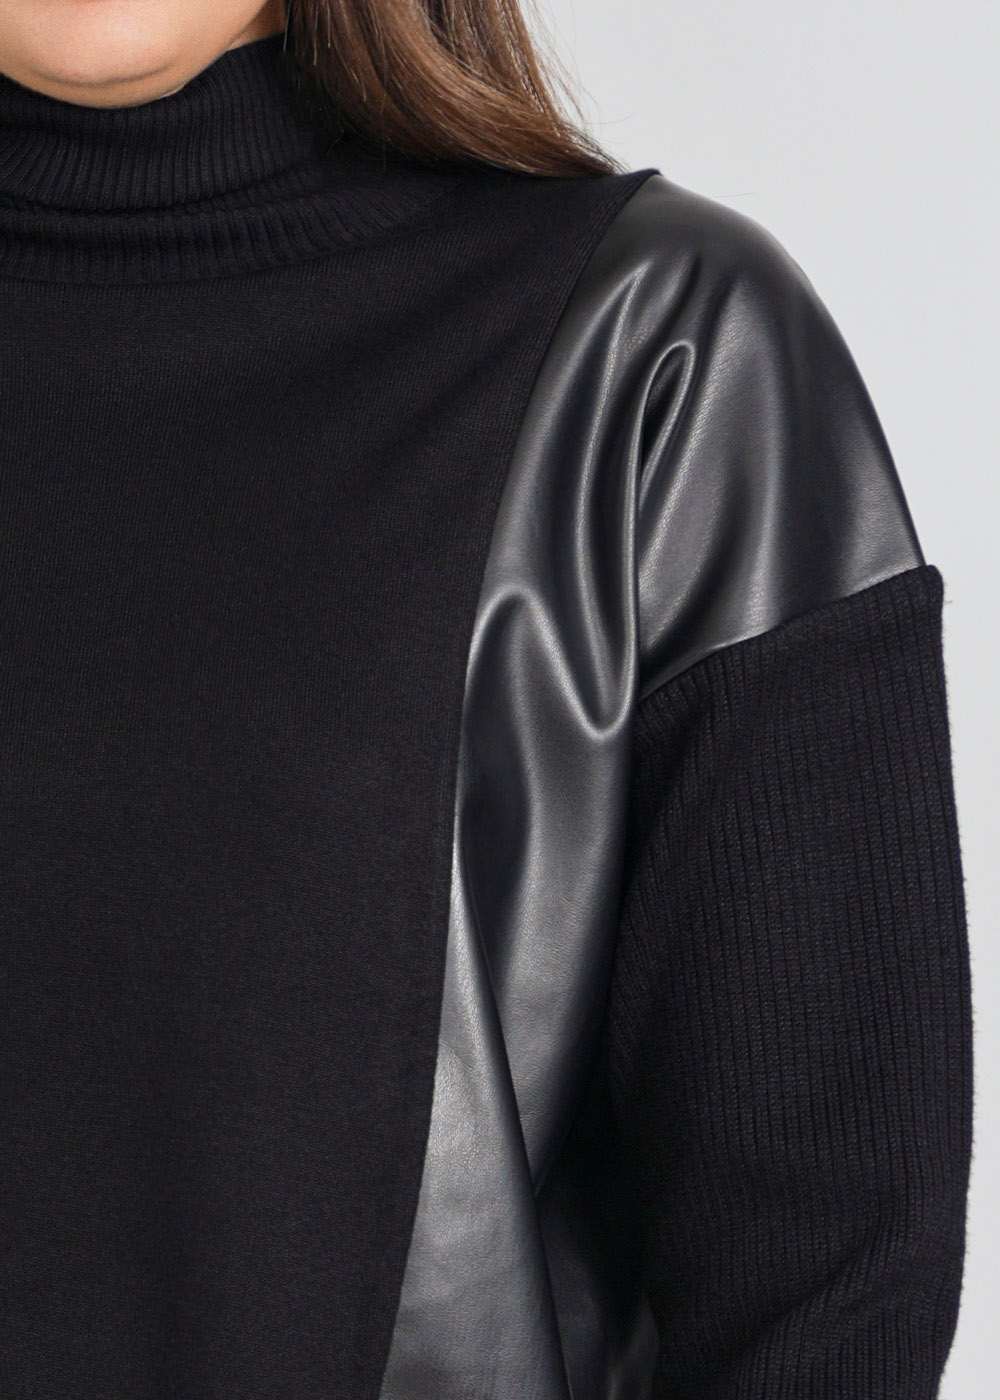 Relaxed Black Sweater with Side Leather Flair